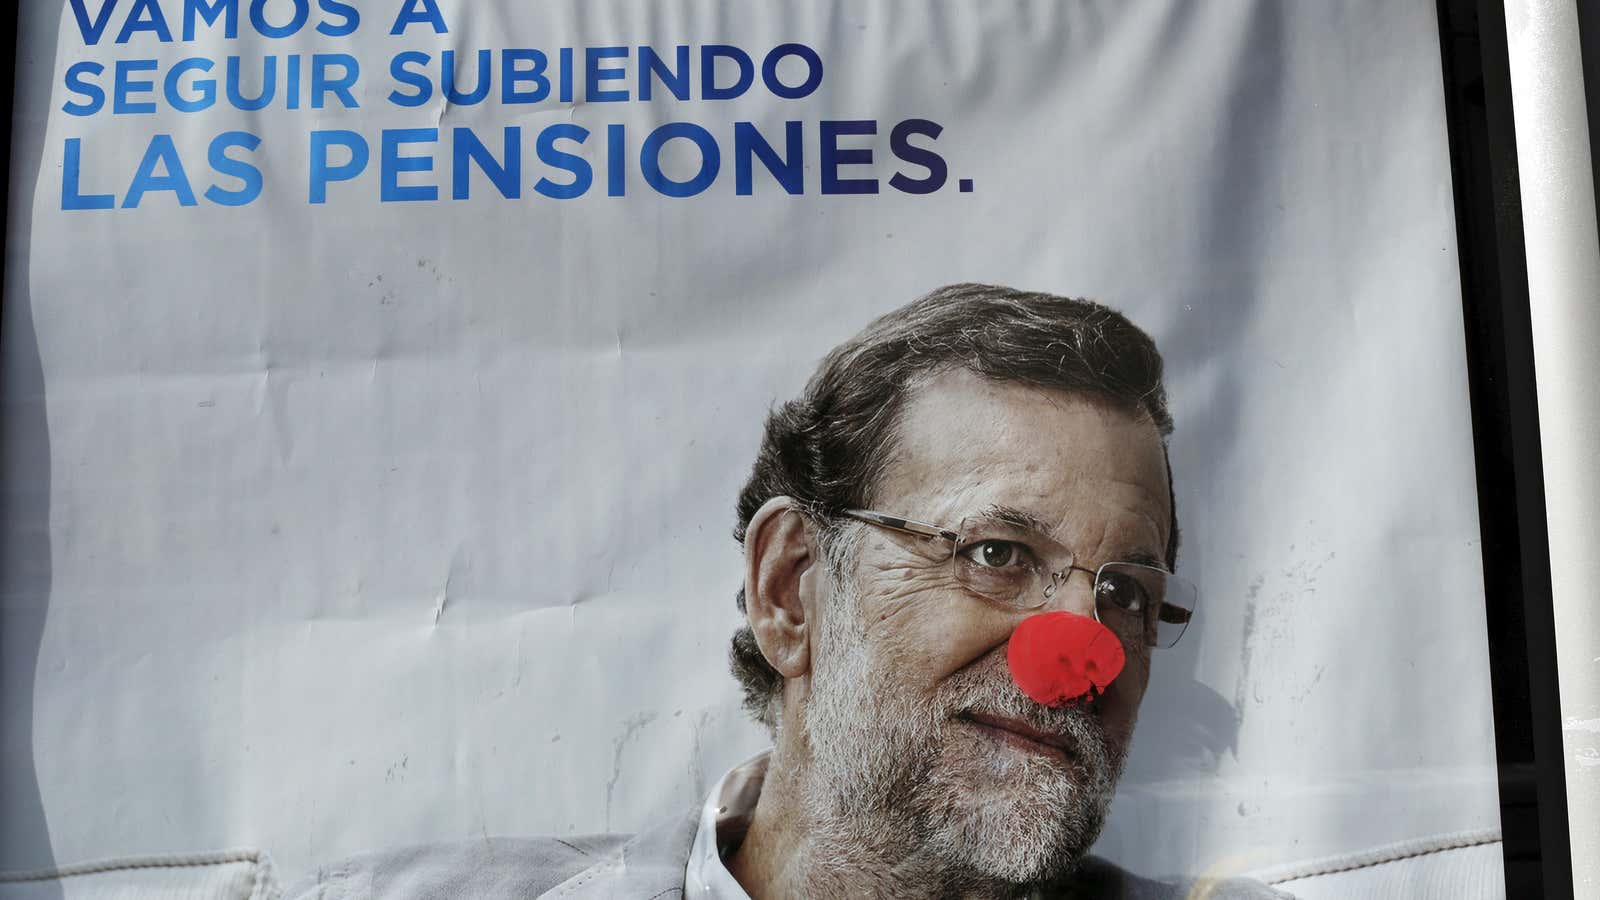 A defaced campaign poster of Spanish Prime Minister and ruling People’s Party (PP) leader Mariano Rajoy.